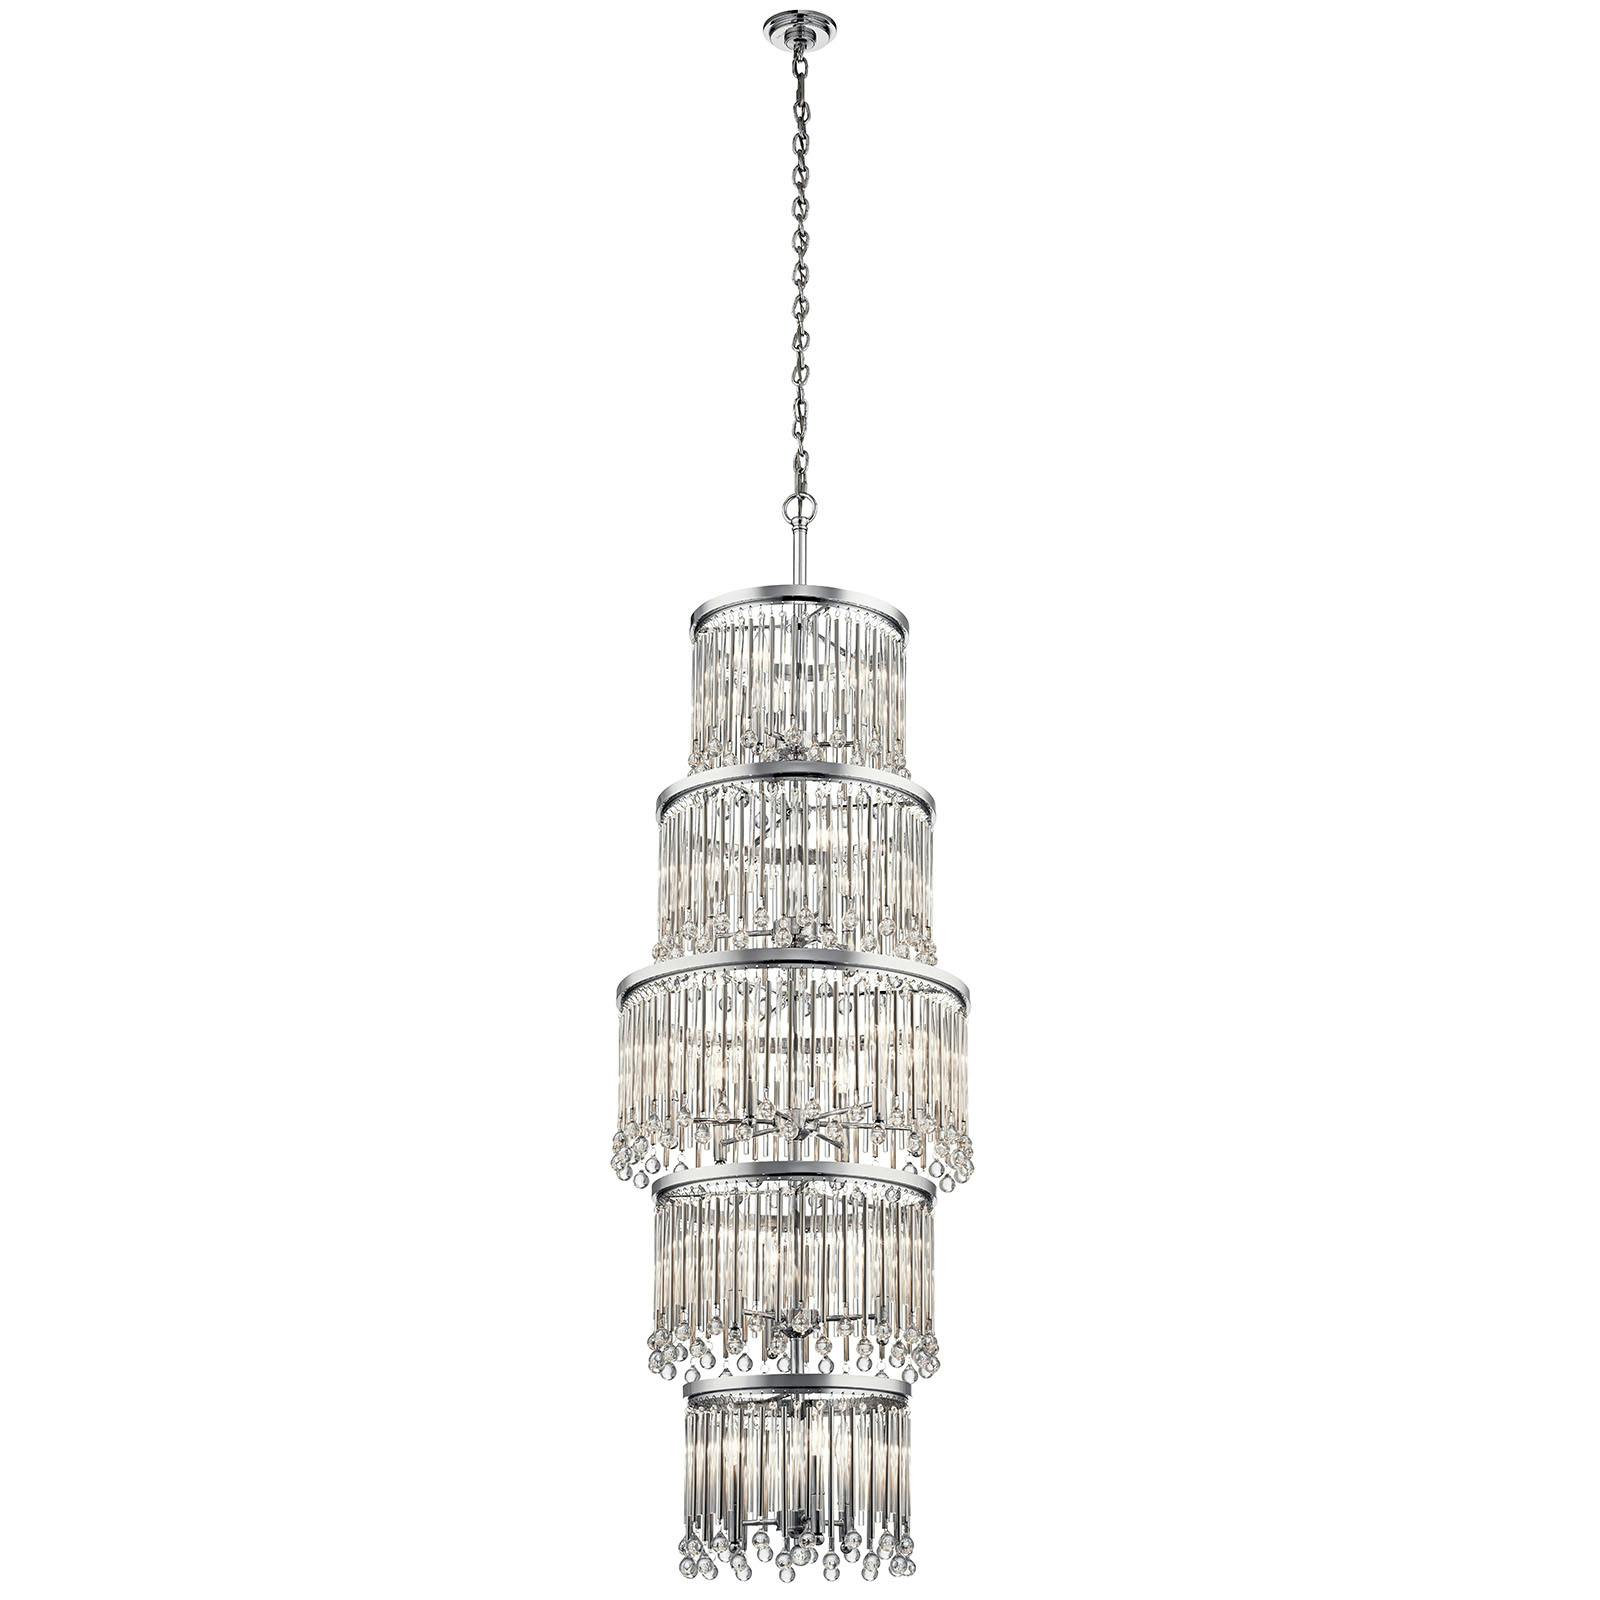 Piper 18 Light Chandelier Chrome on a white background